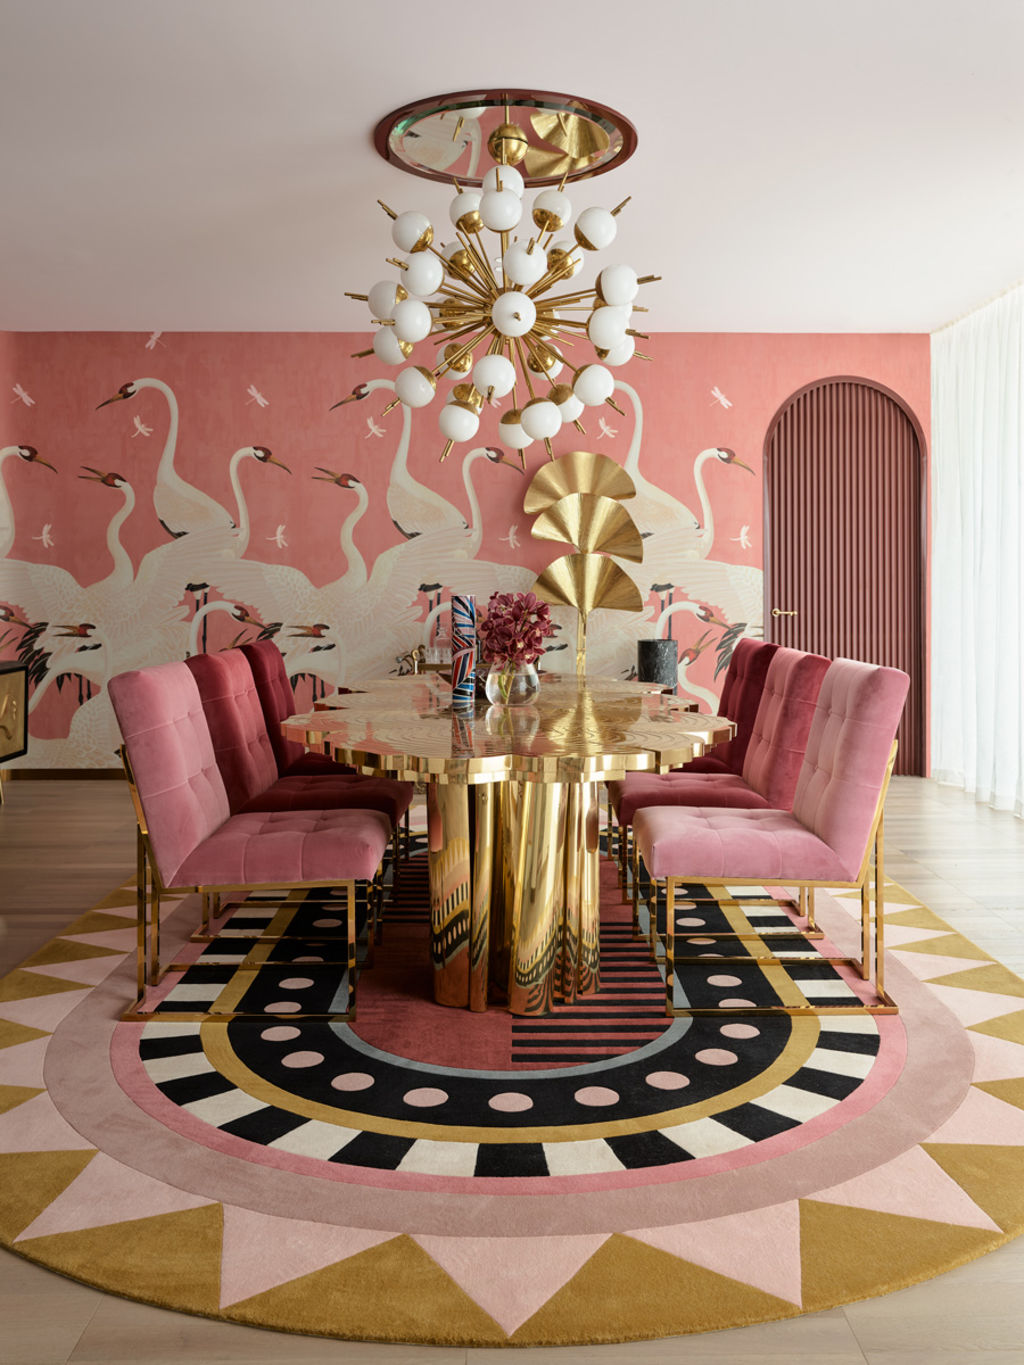 Greg Natale has embraced pink in his Toorak Penhouse project. Photo: Anson Smart